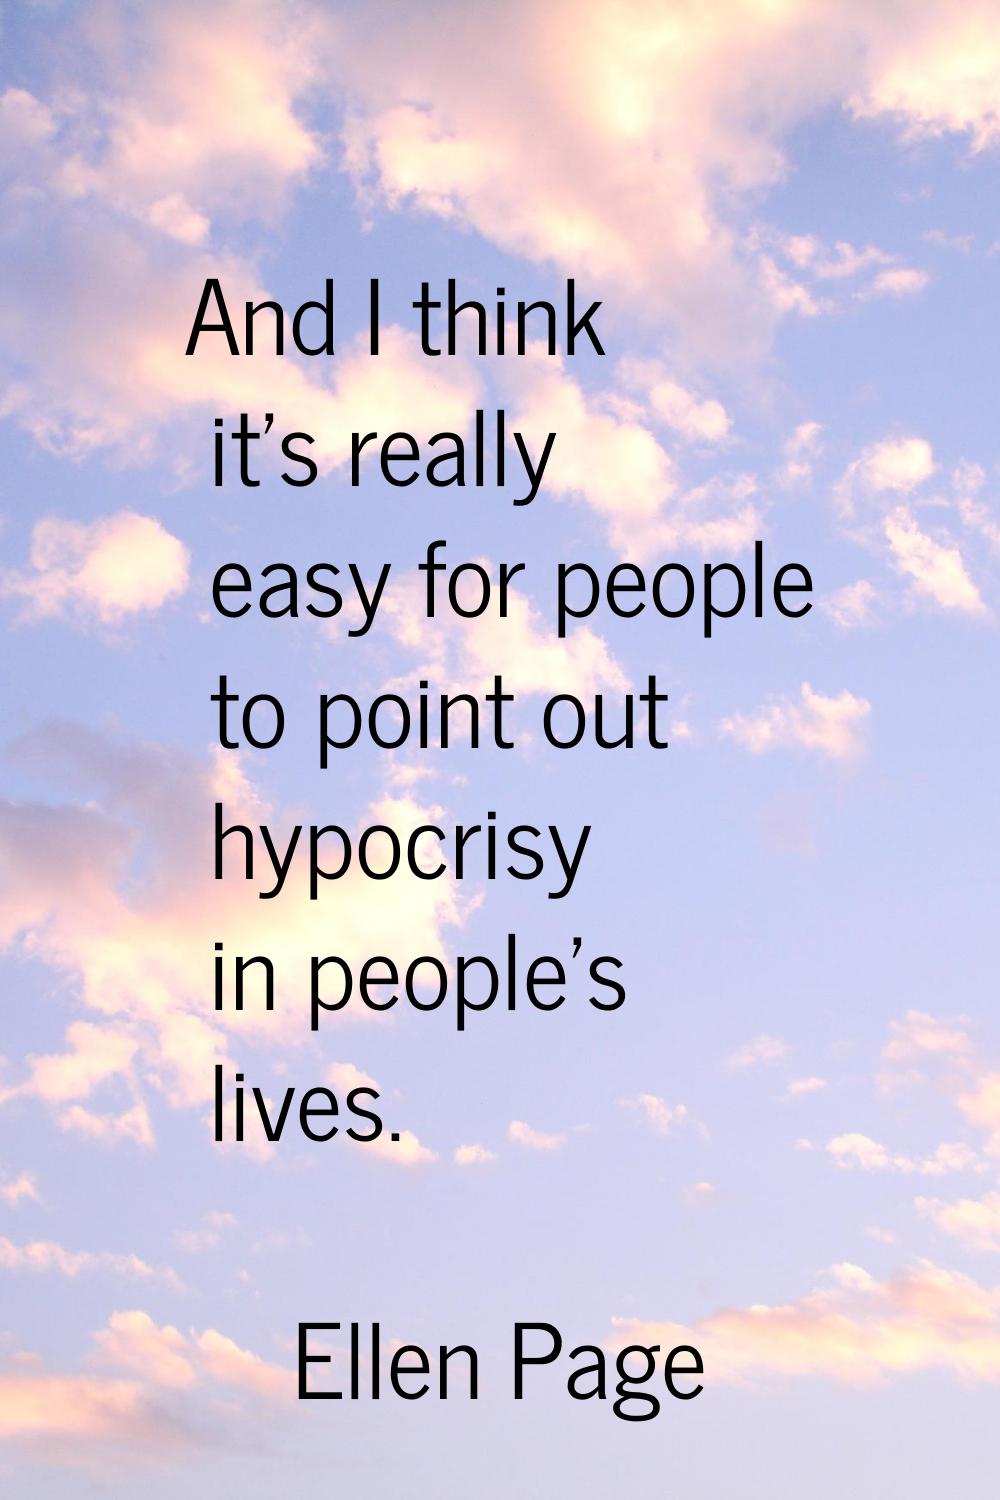 And I think it's really easy for people to point out hypocrisy in people's lives.